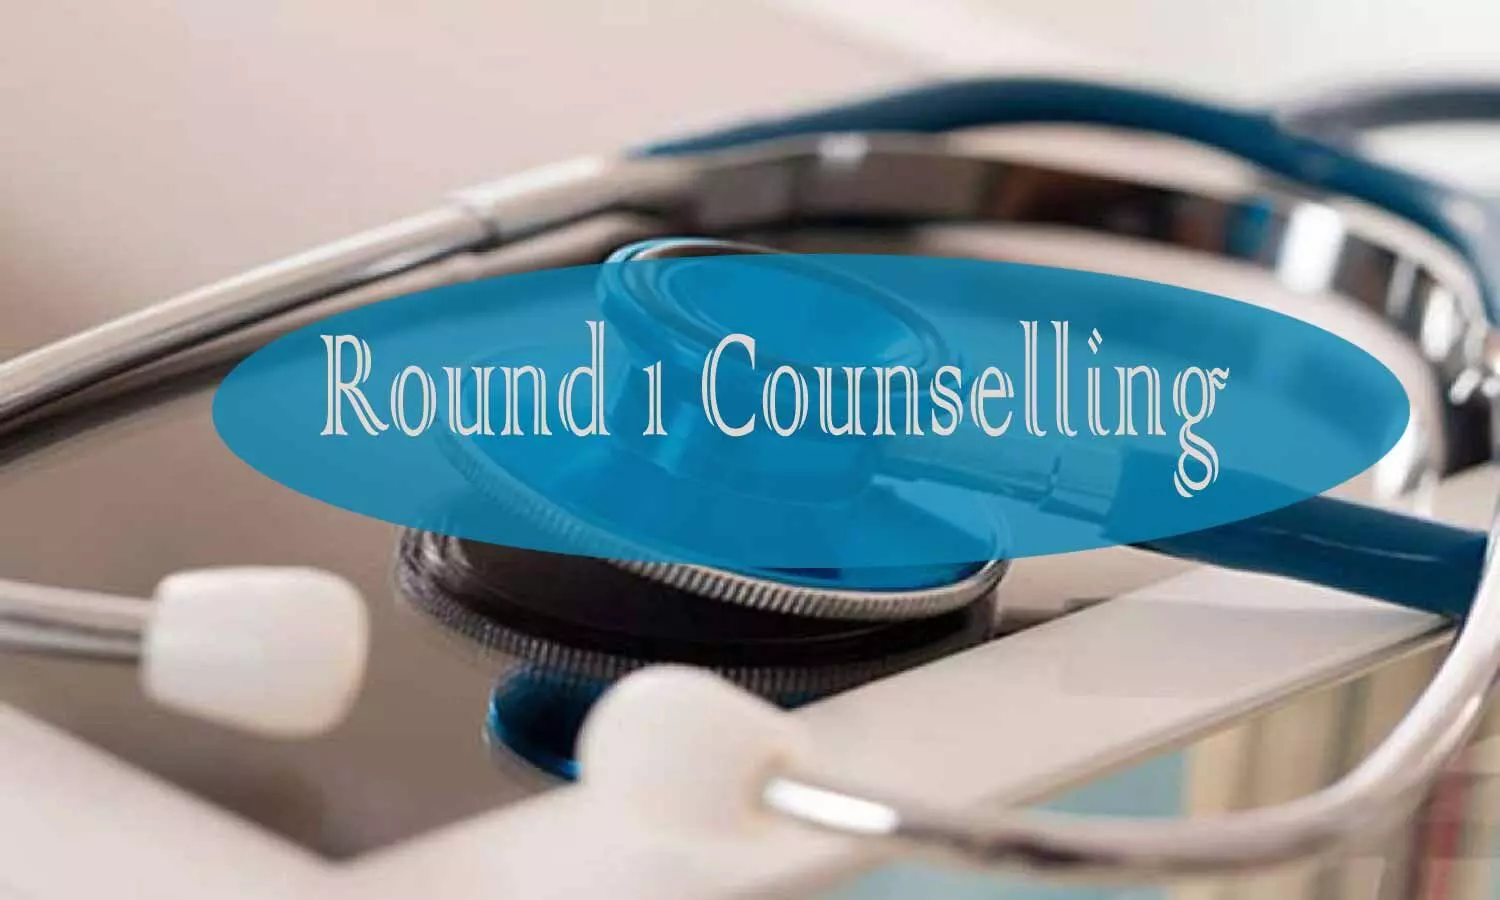 MCC NEET PG Counselling Round 1: List of Eligible NRI candidates released, View here